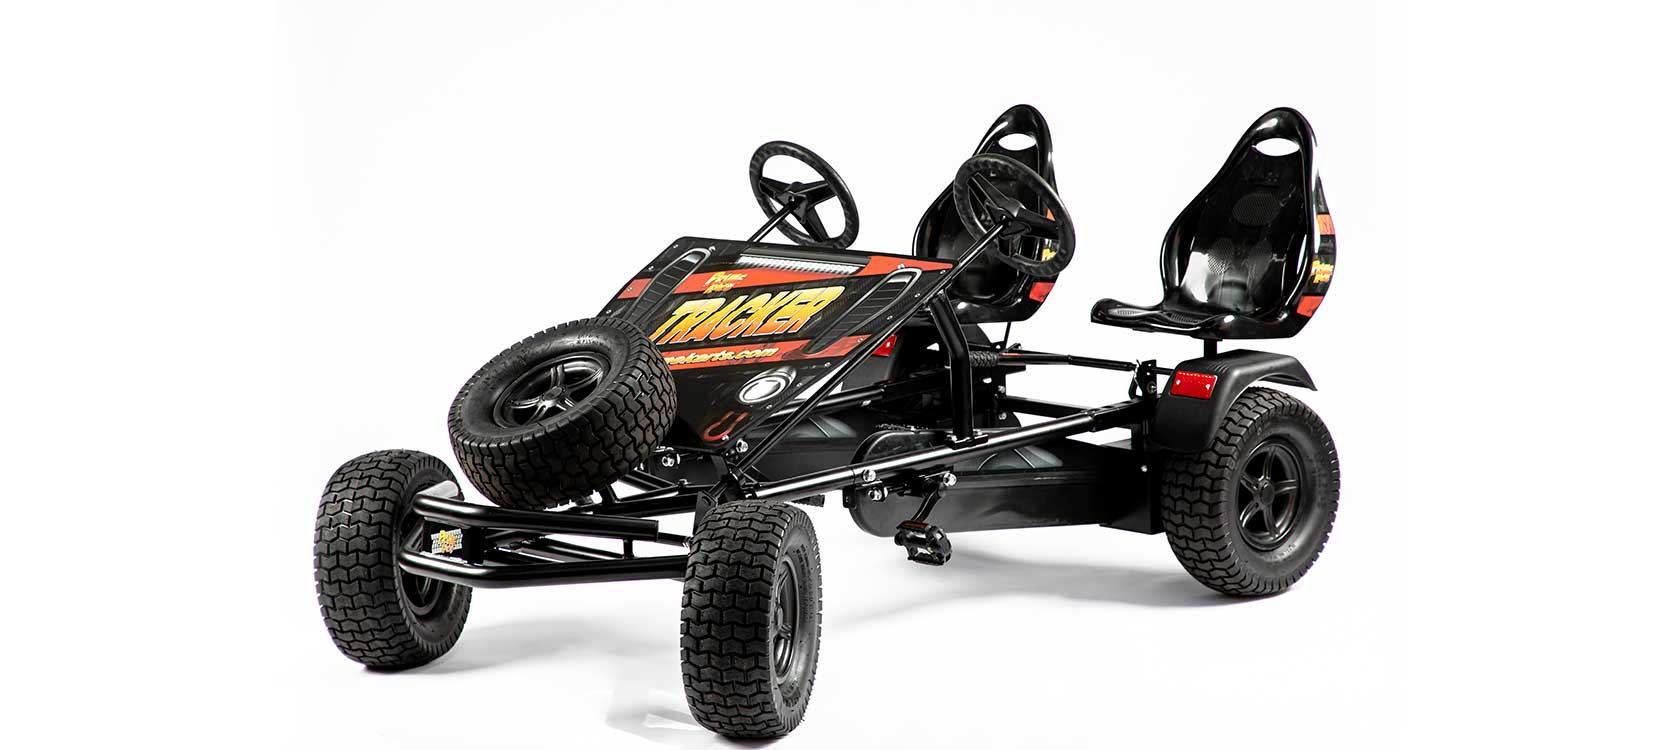 Shop for Pedal Karts and Accessories - Commercial Recreation